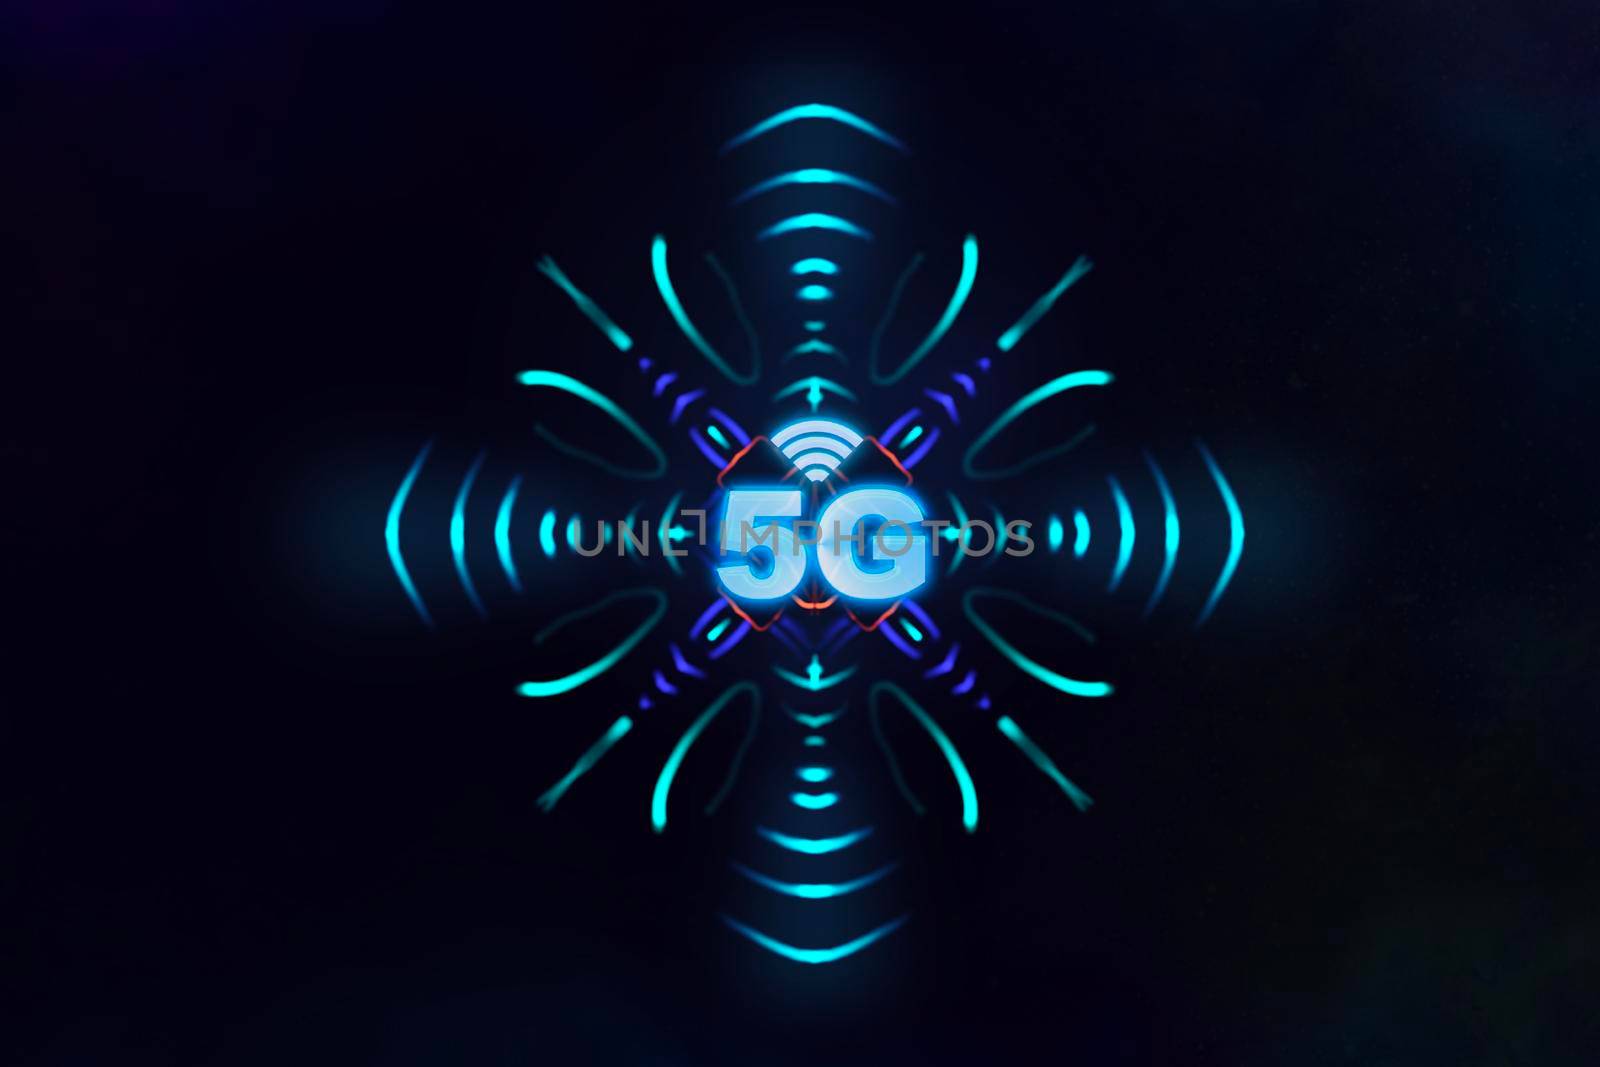 5G technology concept by Wasant